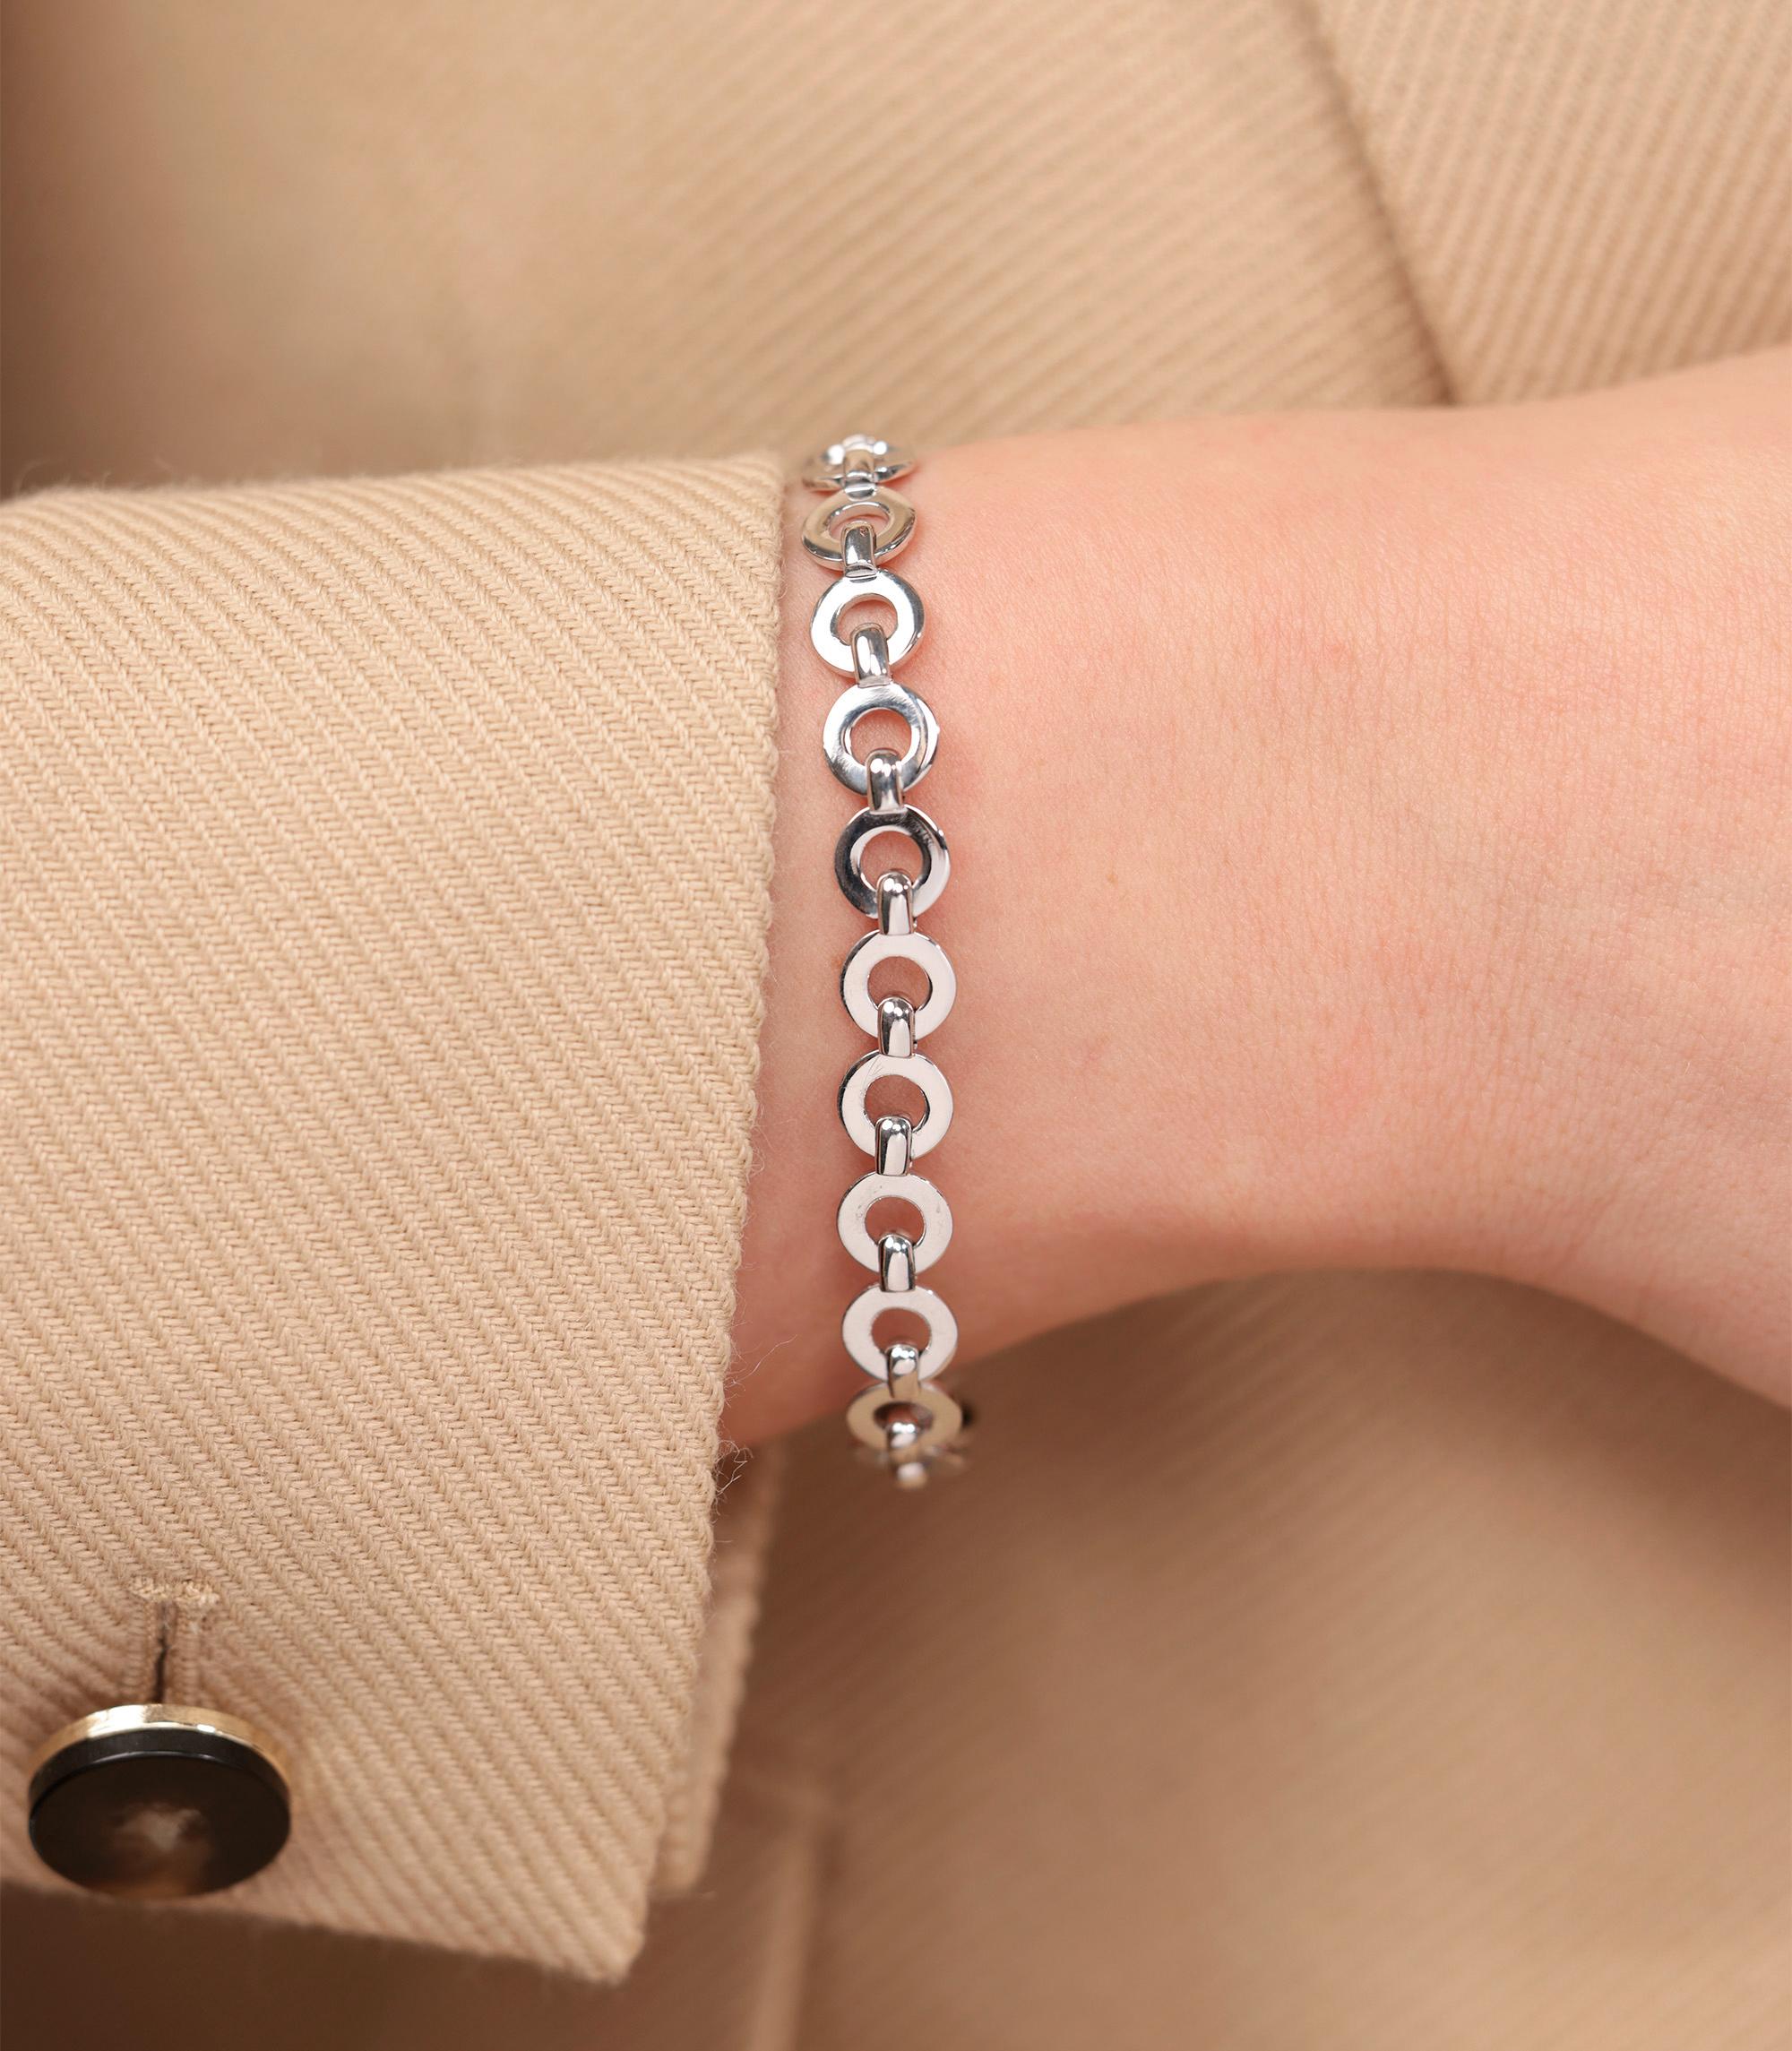 Chanel 18ct White Gold Charm Bracelet

Brand Chanel
Model Charm bracelet
Product Type Bracelet
Serial Number 1*****
Material(s) 18ct White Gold
Bracelet Length 19cm
Bracelet Width 7.3mm
Total Weight 21g
Condition Rating Excellent
Condition Notes An